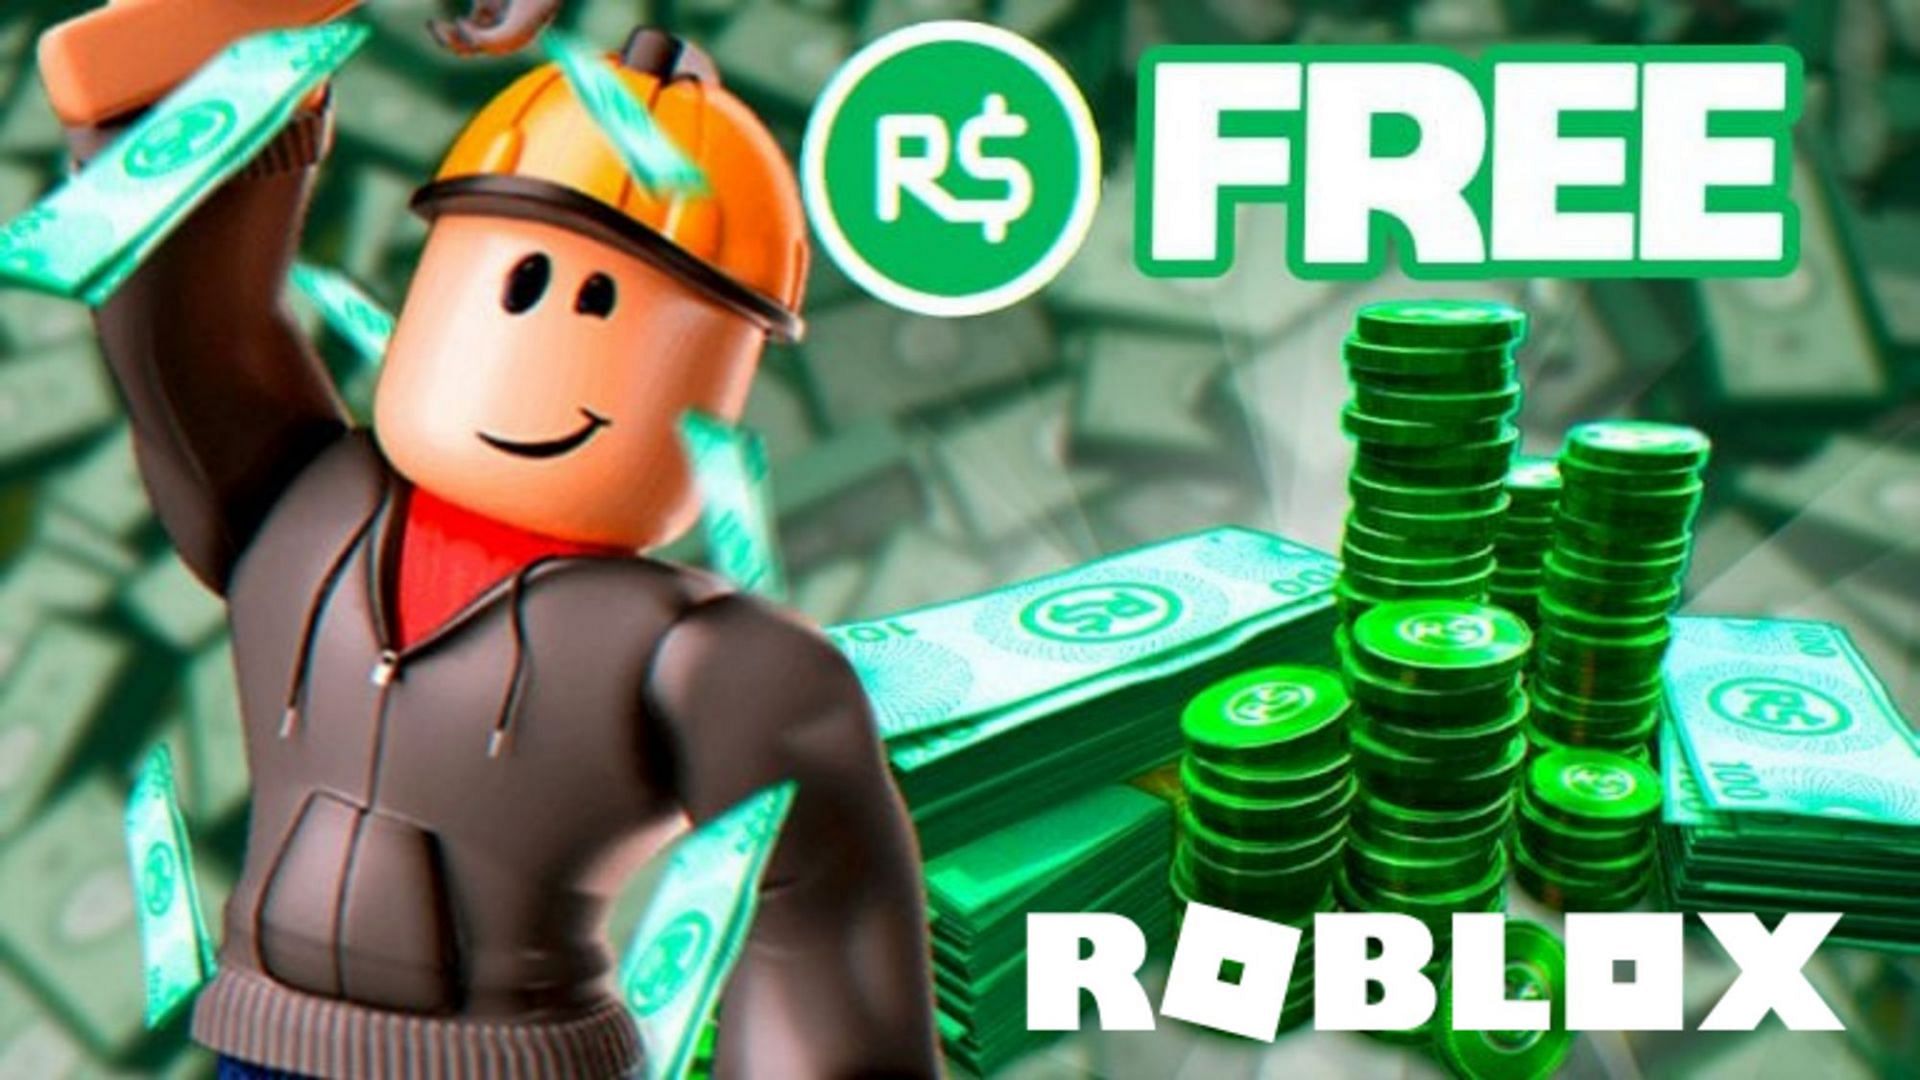 5 easiest ways to get more Robux in Roblox (May 2022)